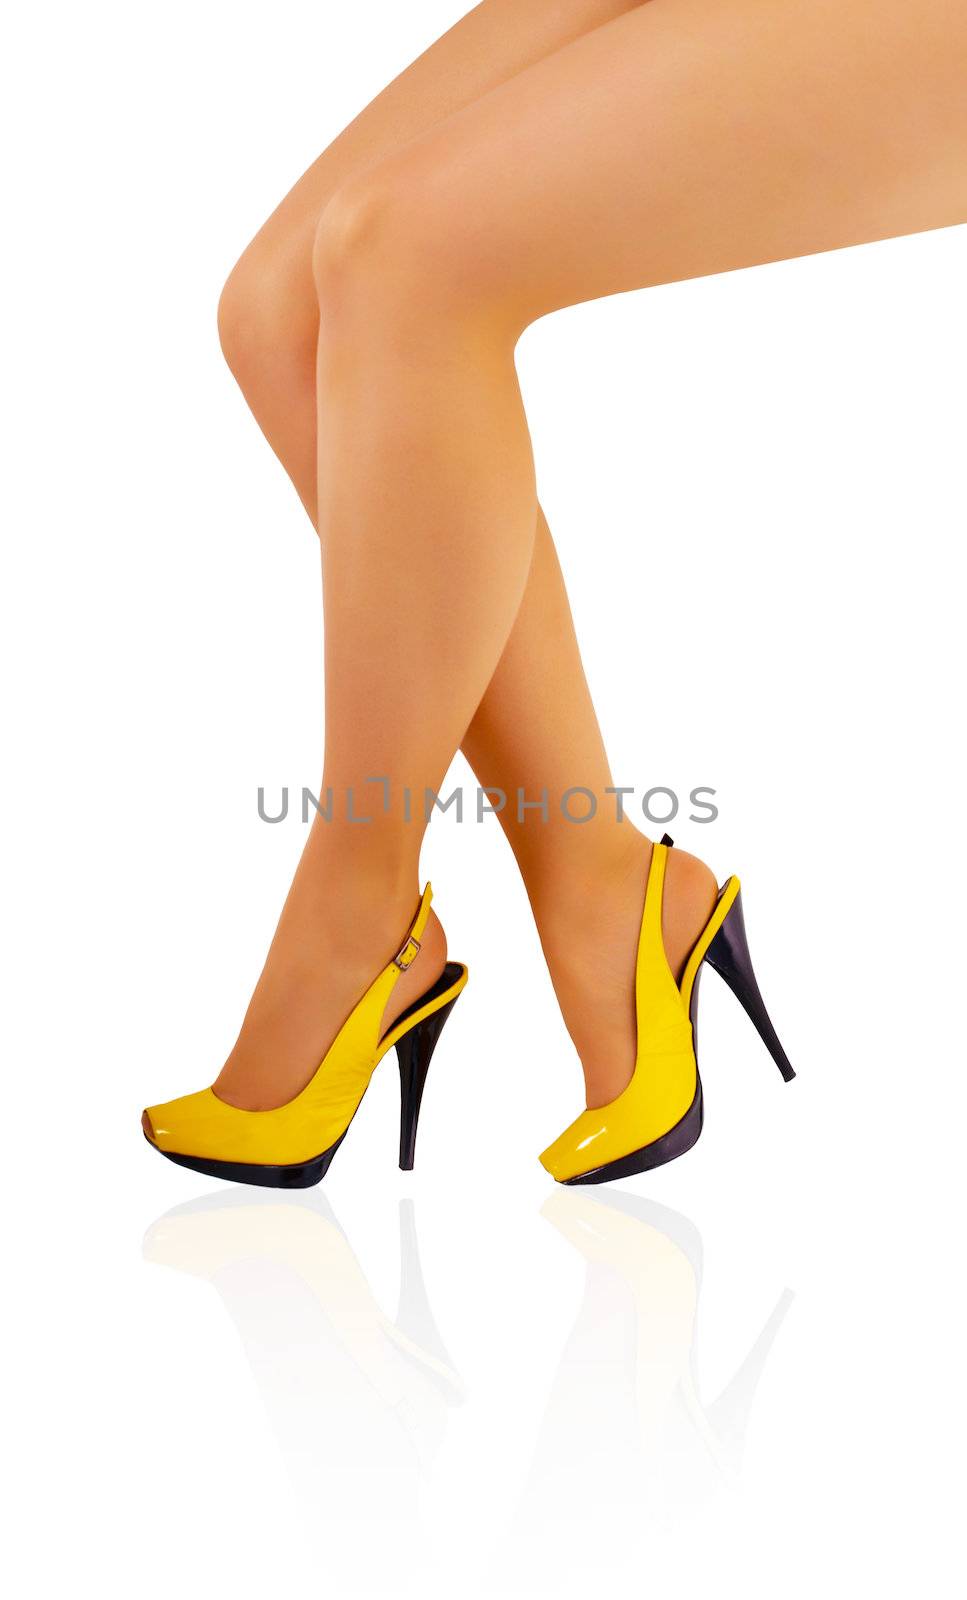 Beautiful legs of young girl in tights and yellow shoes isolated on white background